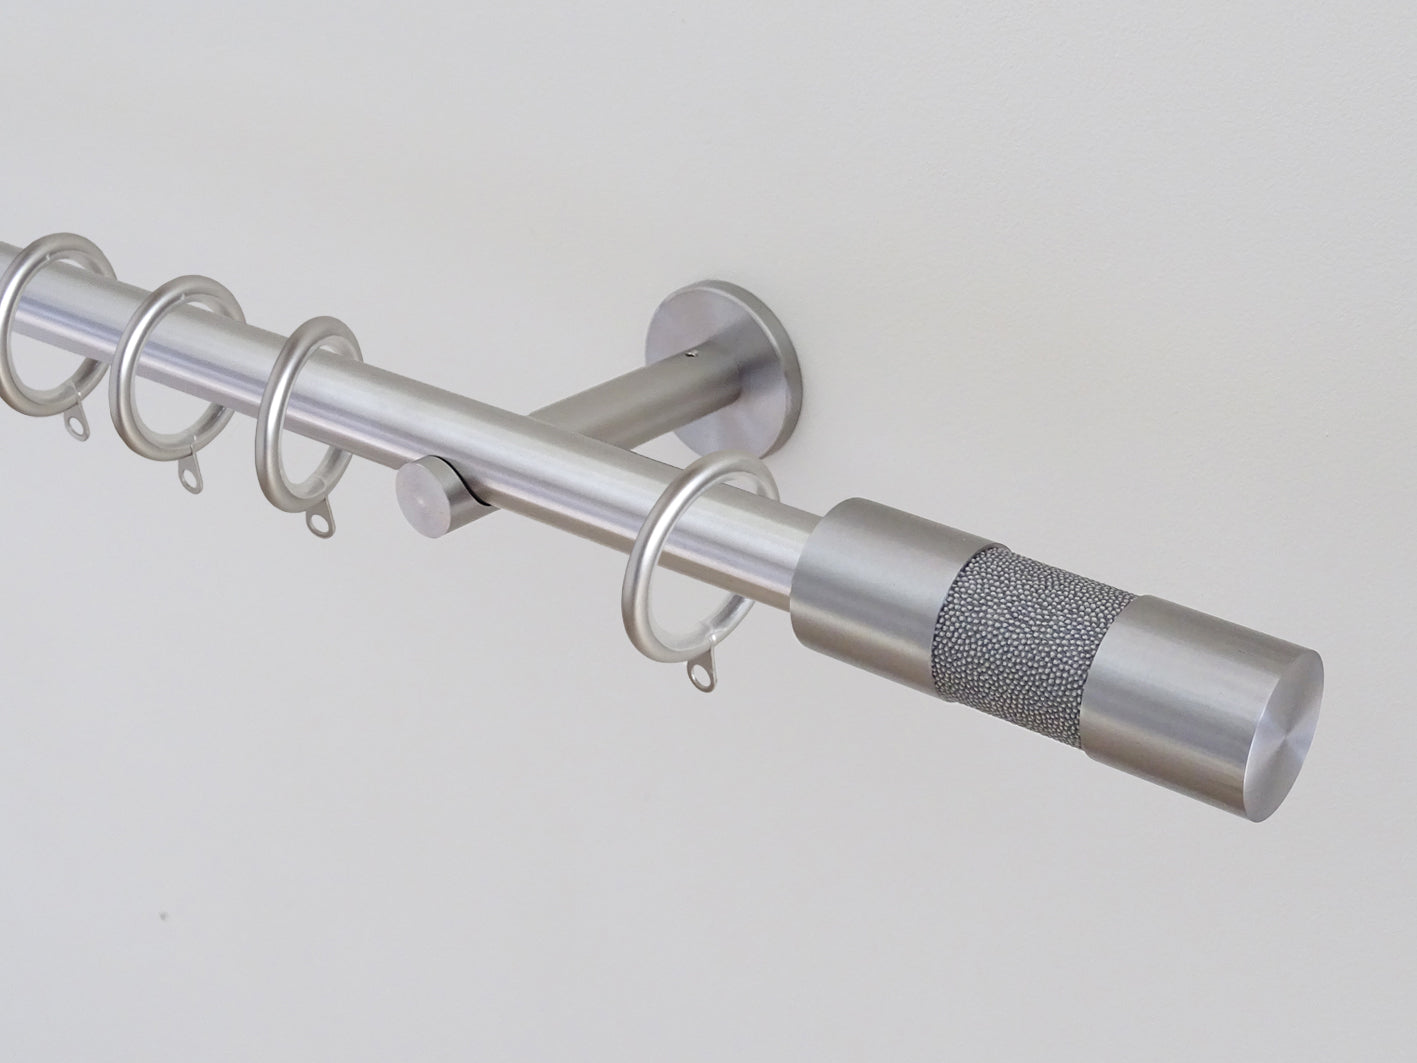 19mm diameter stainless steel curtain pole sets with steel barrel finials in grey